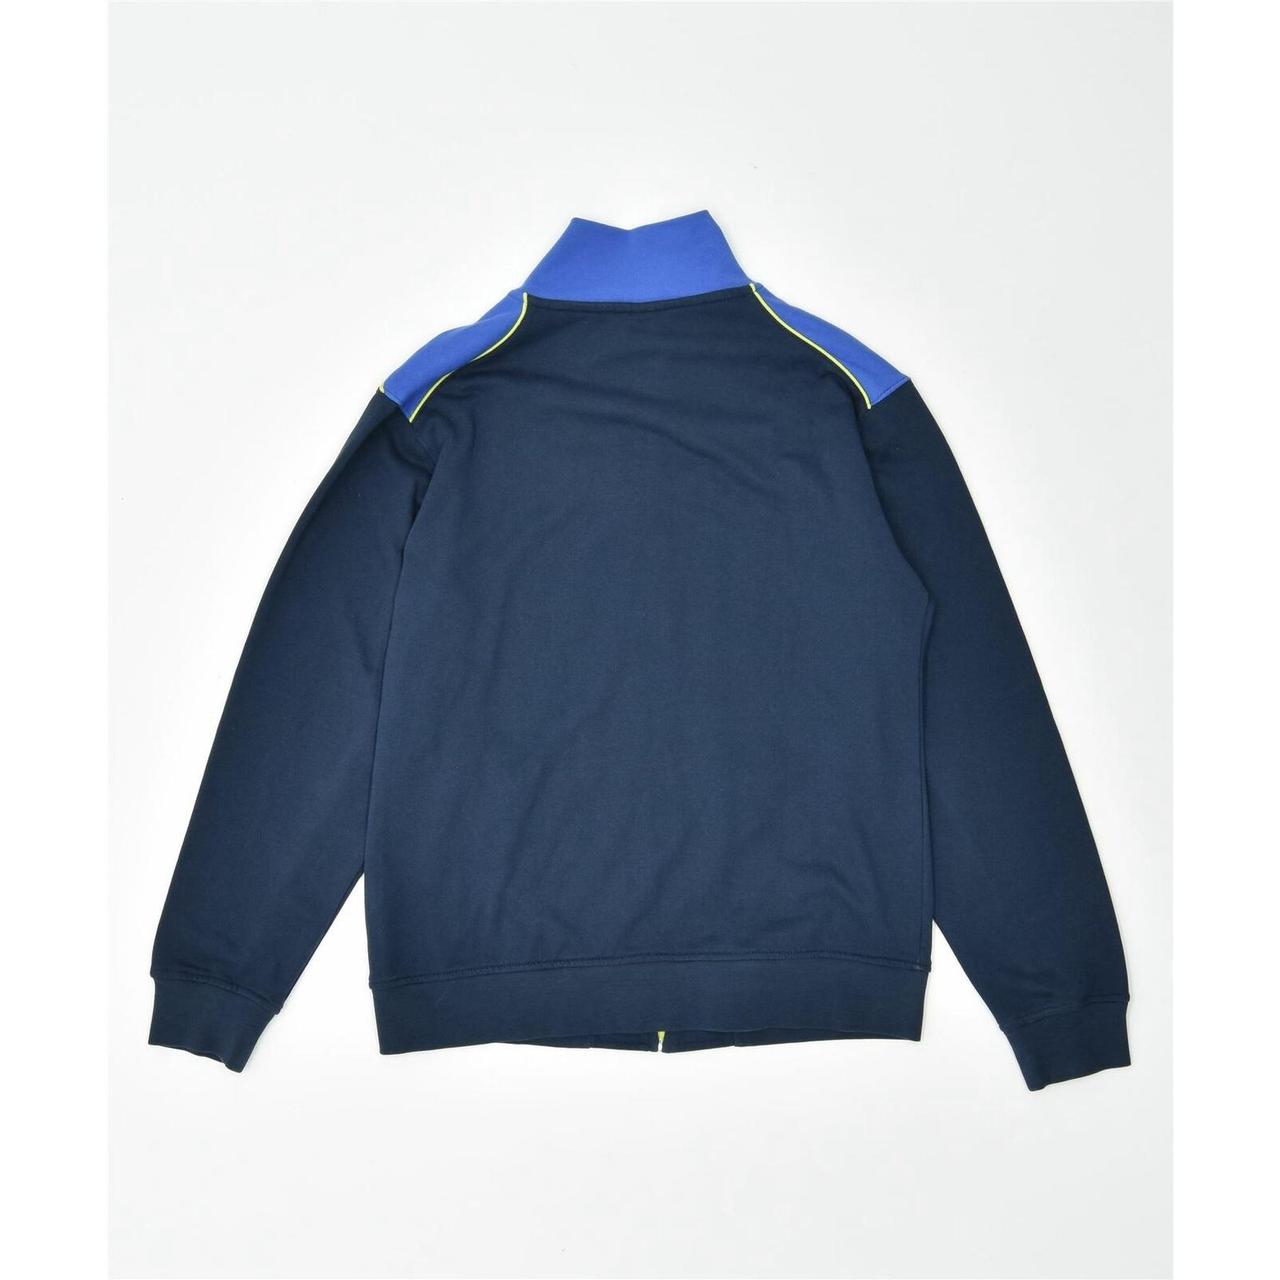 Product Image 2 - ARENA Womens Tracksuit Top Jacket